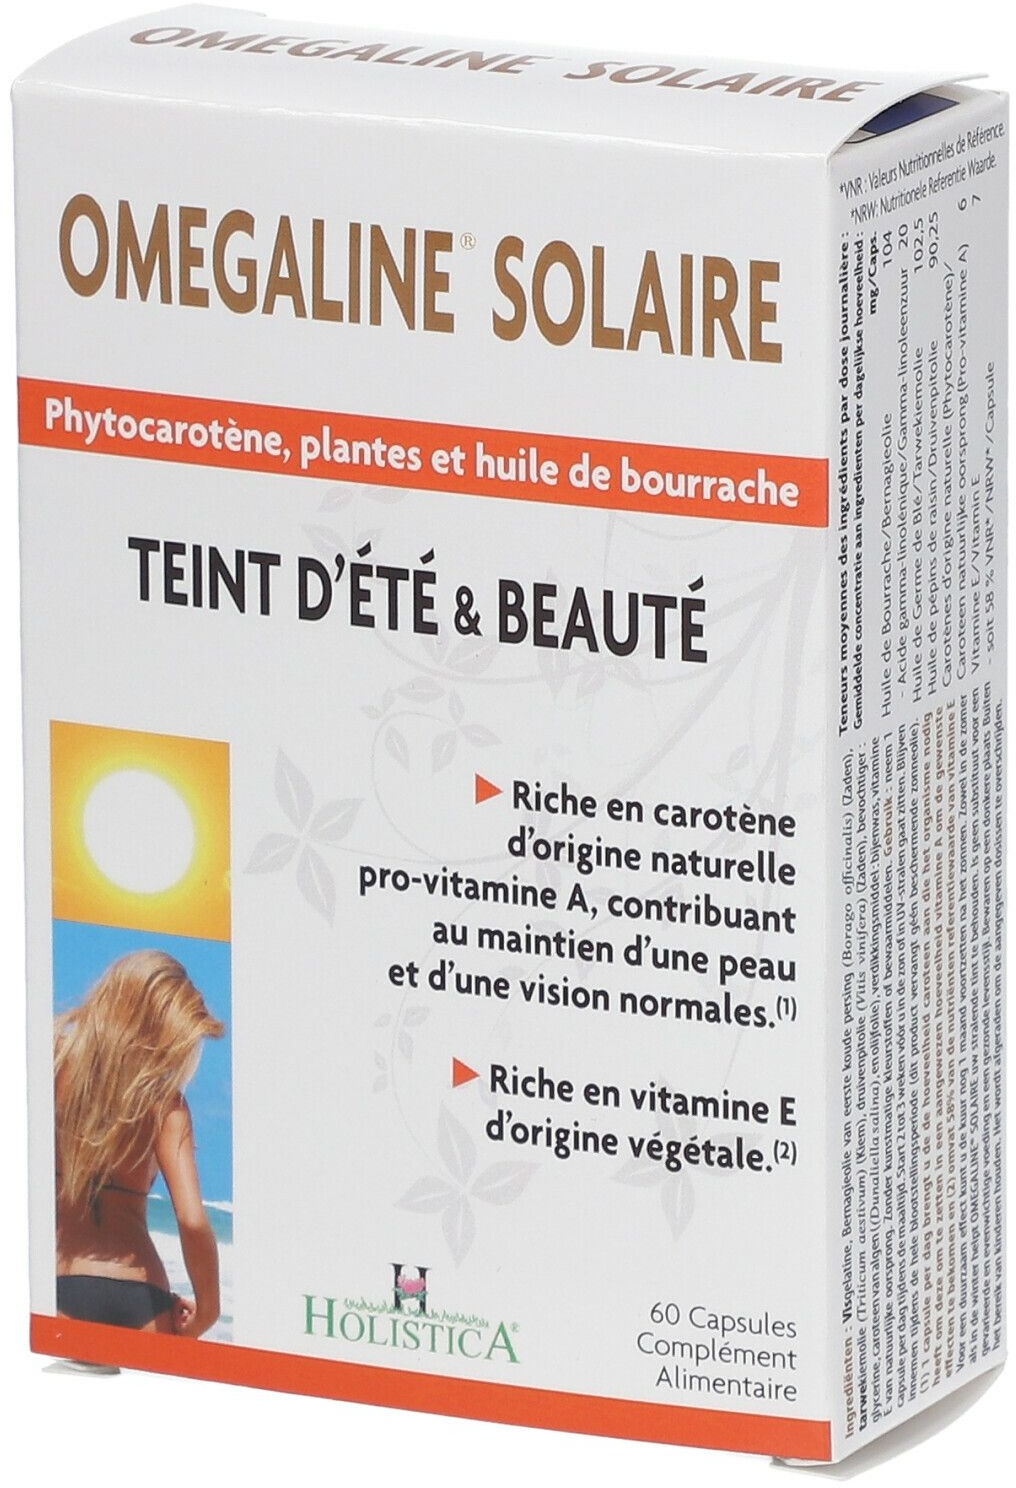 Omegaline® Solaire Beauty & Sommerlicher Teint